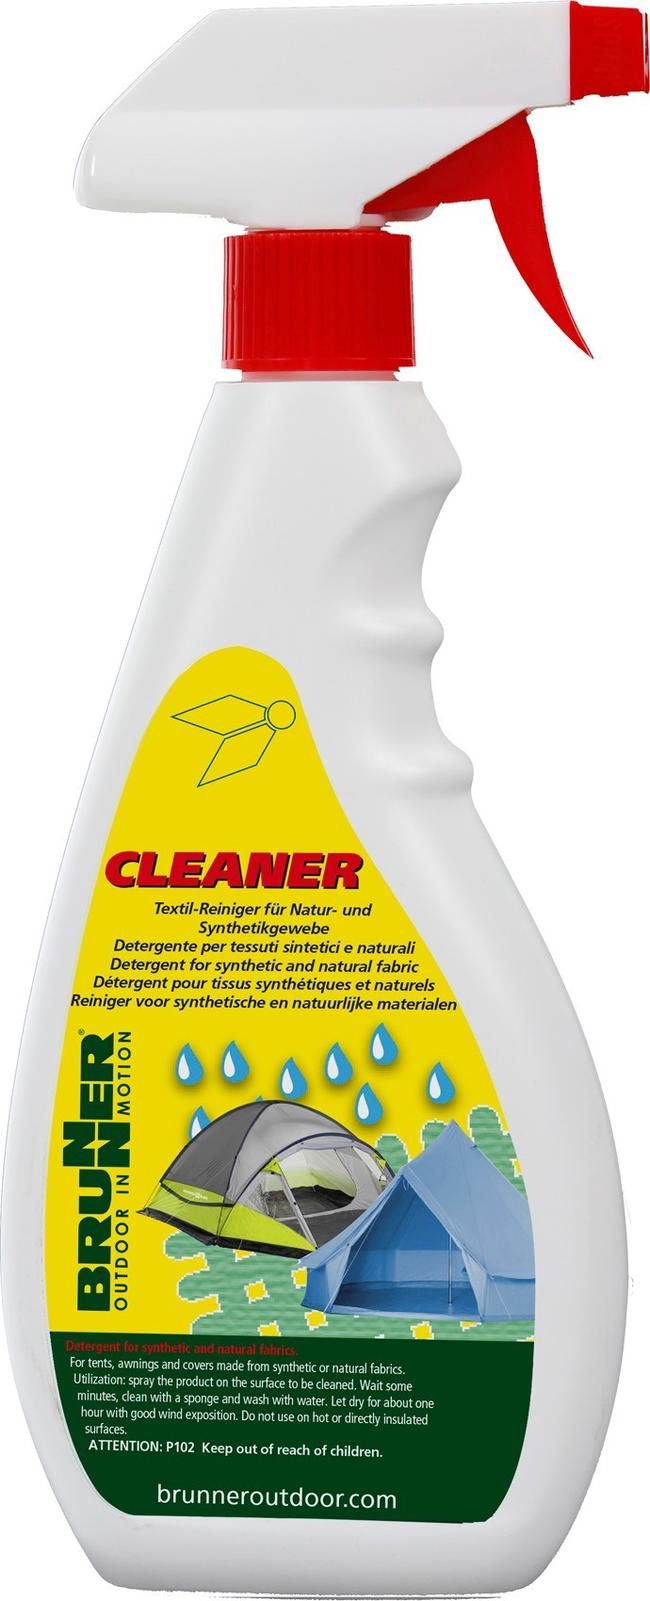 cleaner